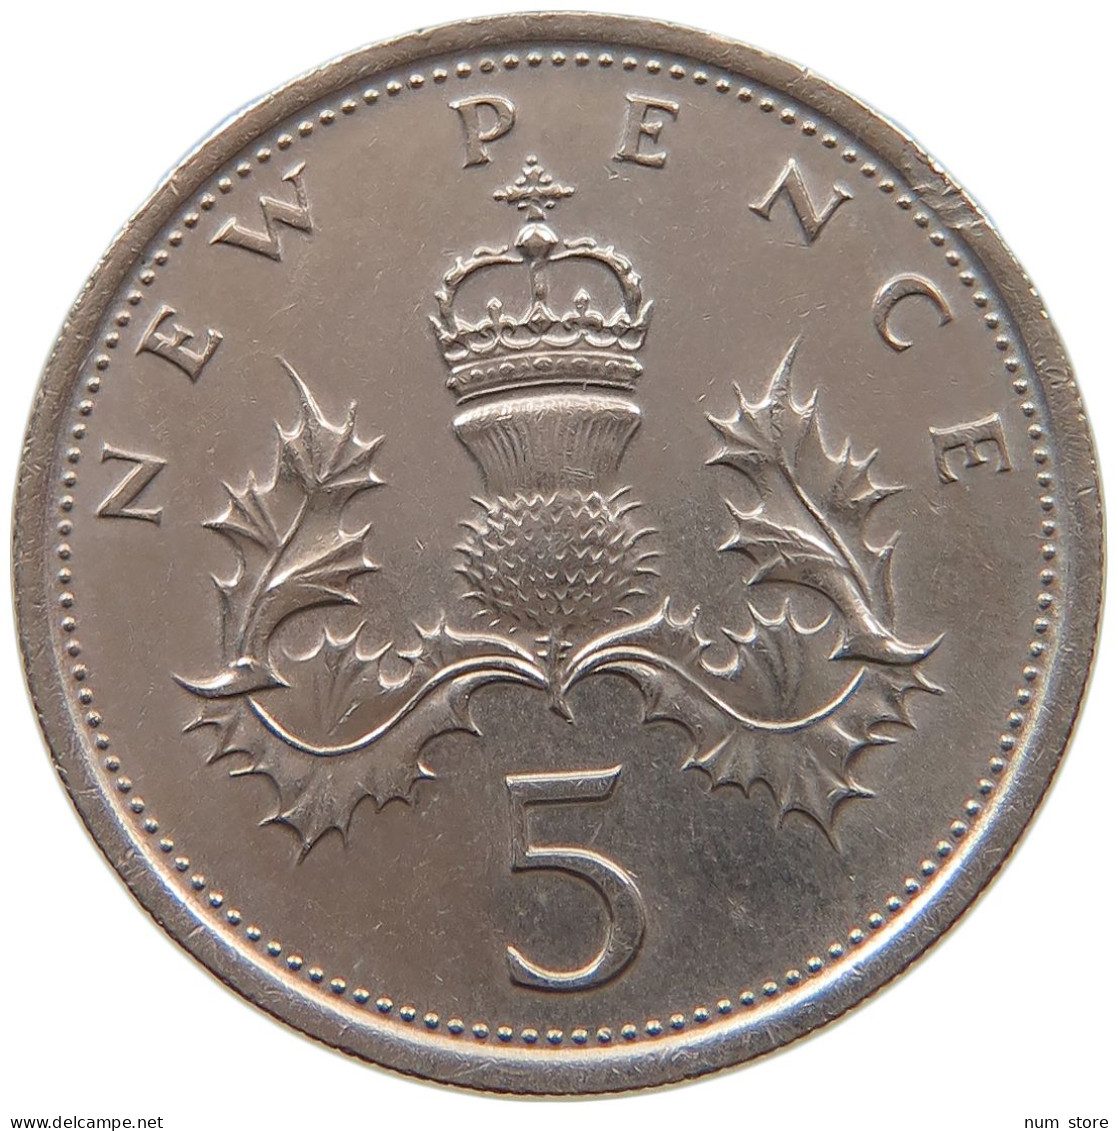 GREAT BRITAIN 5 PENCE 1977 #a072 0333 - 5 Pence & 5 New Pence